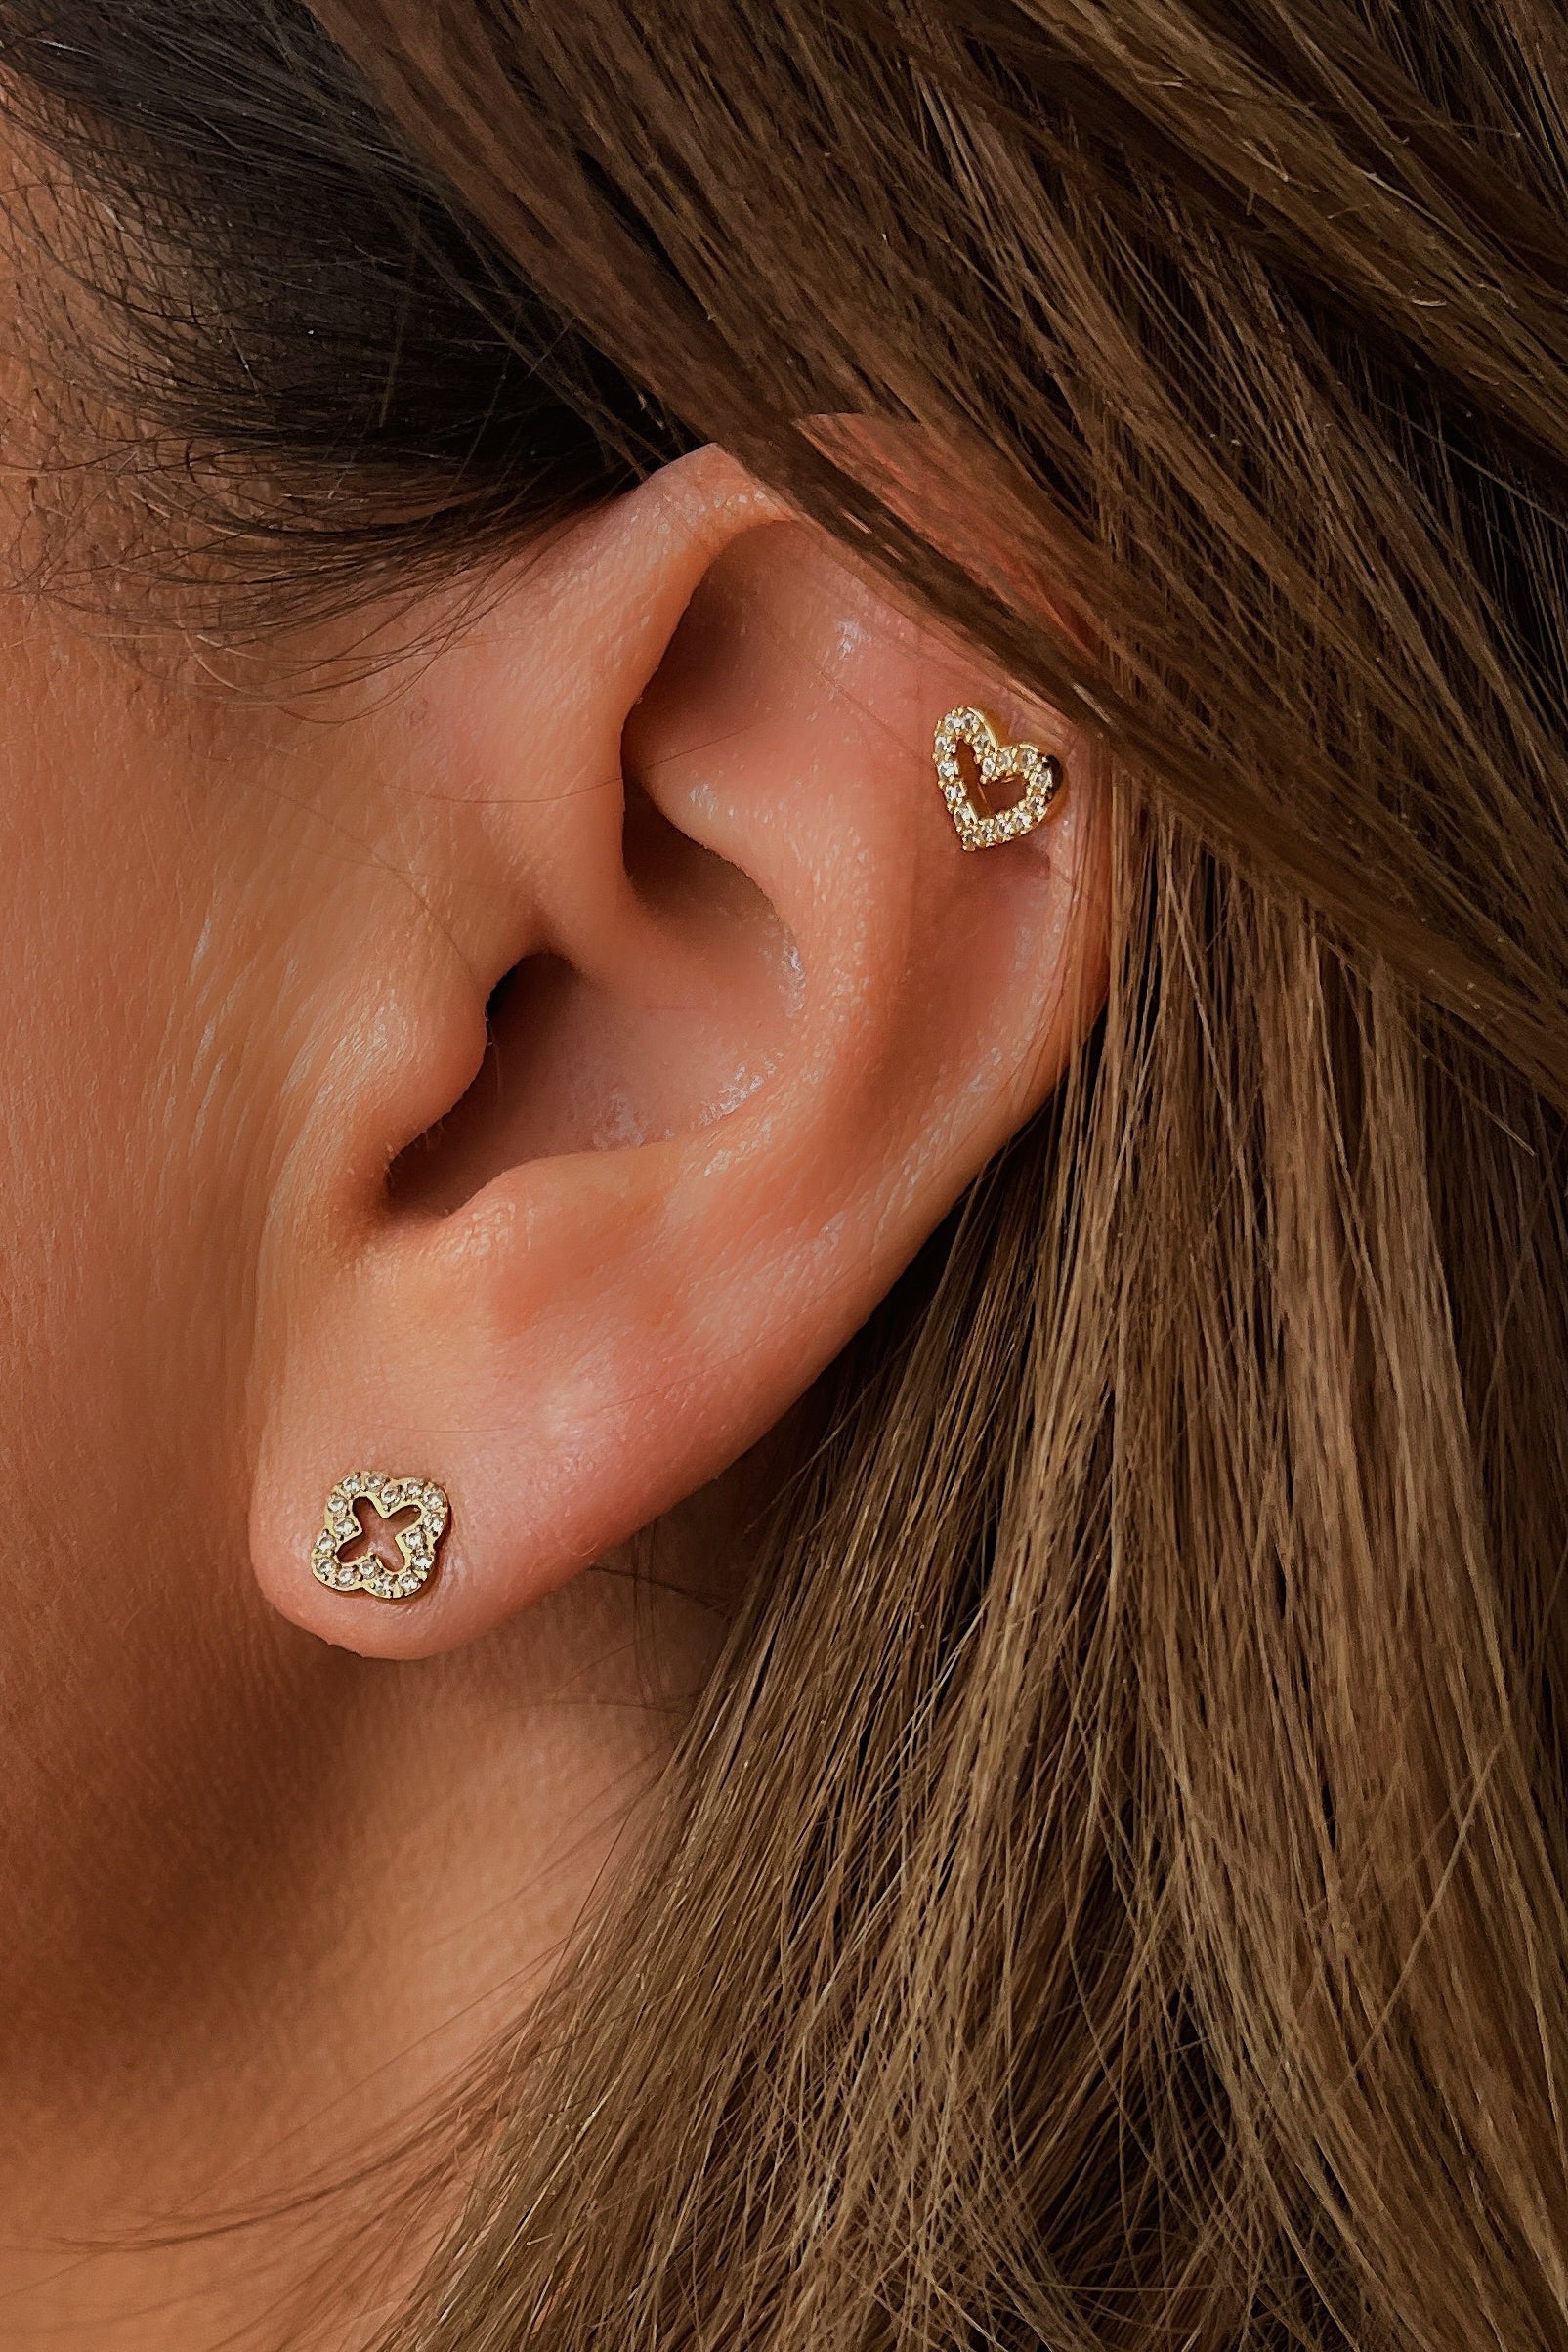 Mimi Studs - Boutique Minimaliste has waterproof, durable, elegant and vintage inspired jewelry